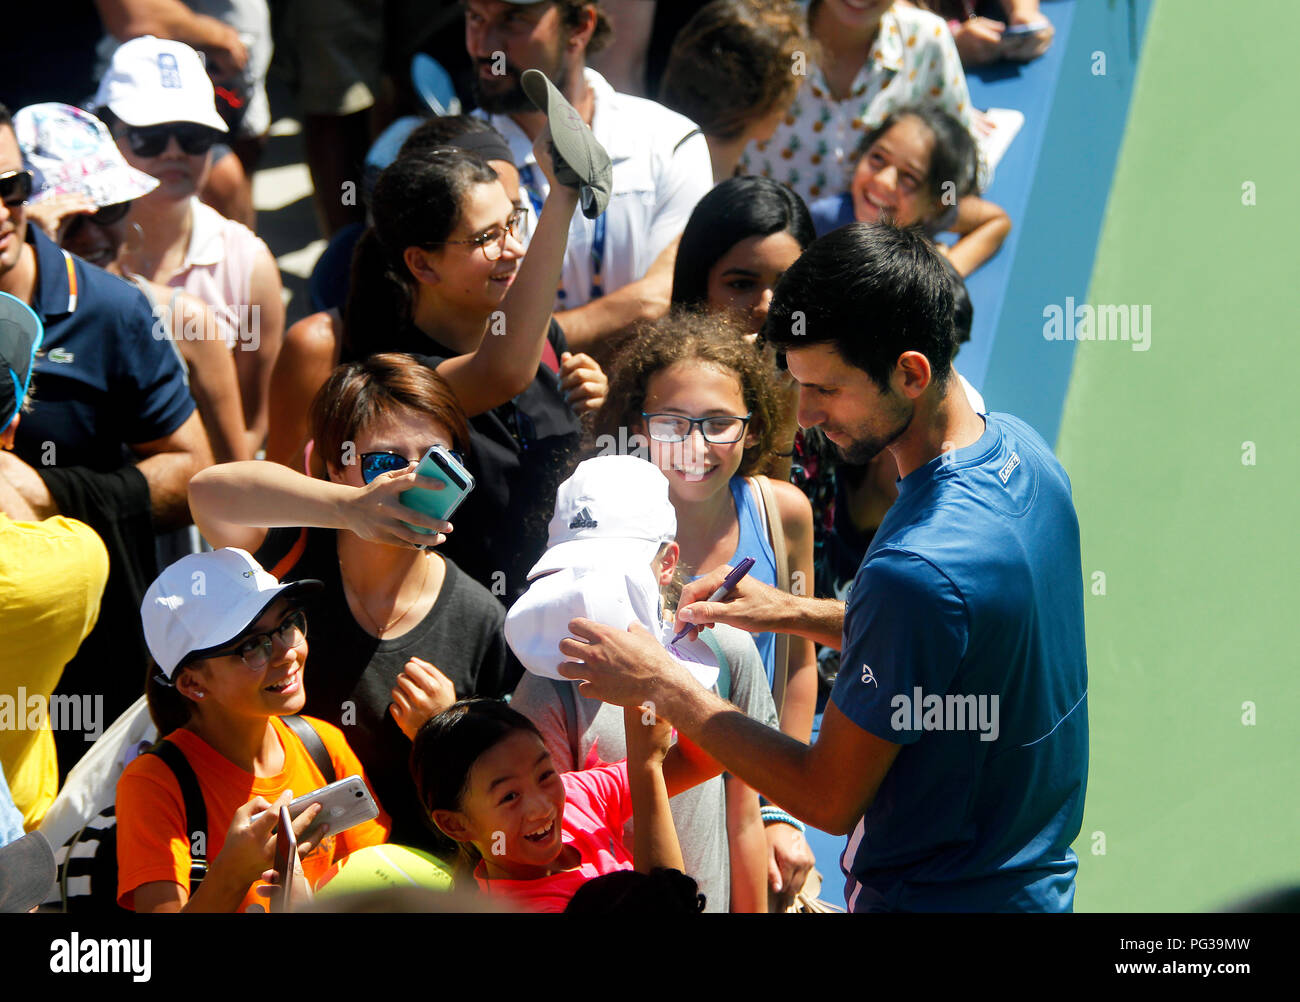 New York, United States. 23rd Aug, 2018. New York, N.Y, August 23, 2018 - US Open Tennis Practice: Novak Djokovic signs autographs for fans after practicing at the Billie Jean King National Tennis Center in Flushing Meadows, New York, as players prepared for the U.S. Open which begins next Monday. Credit: Adam Stoltman/Alamy Live News Stock Photo